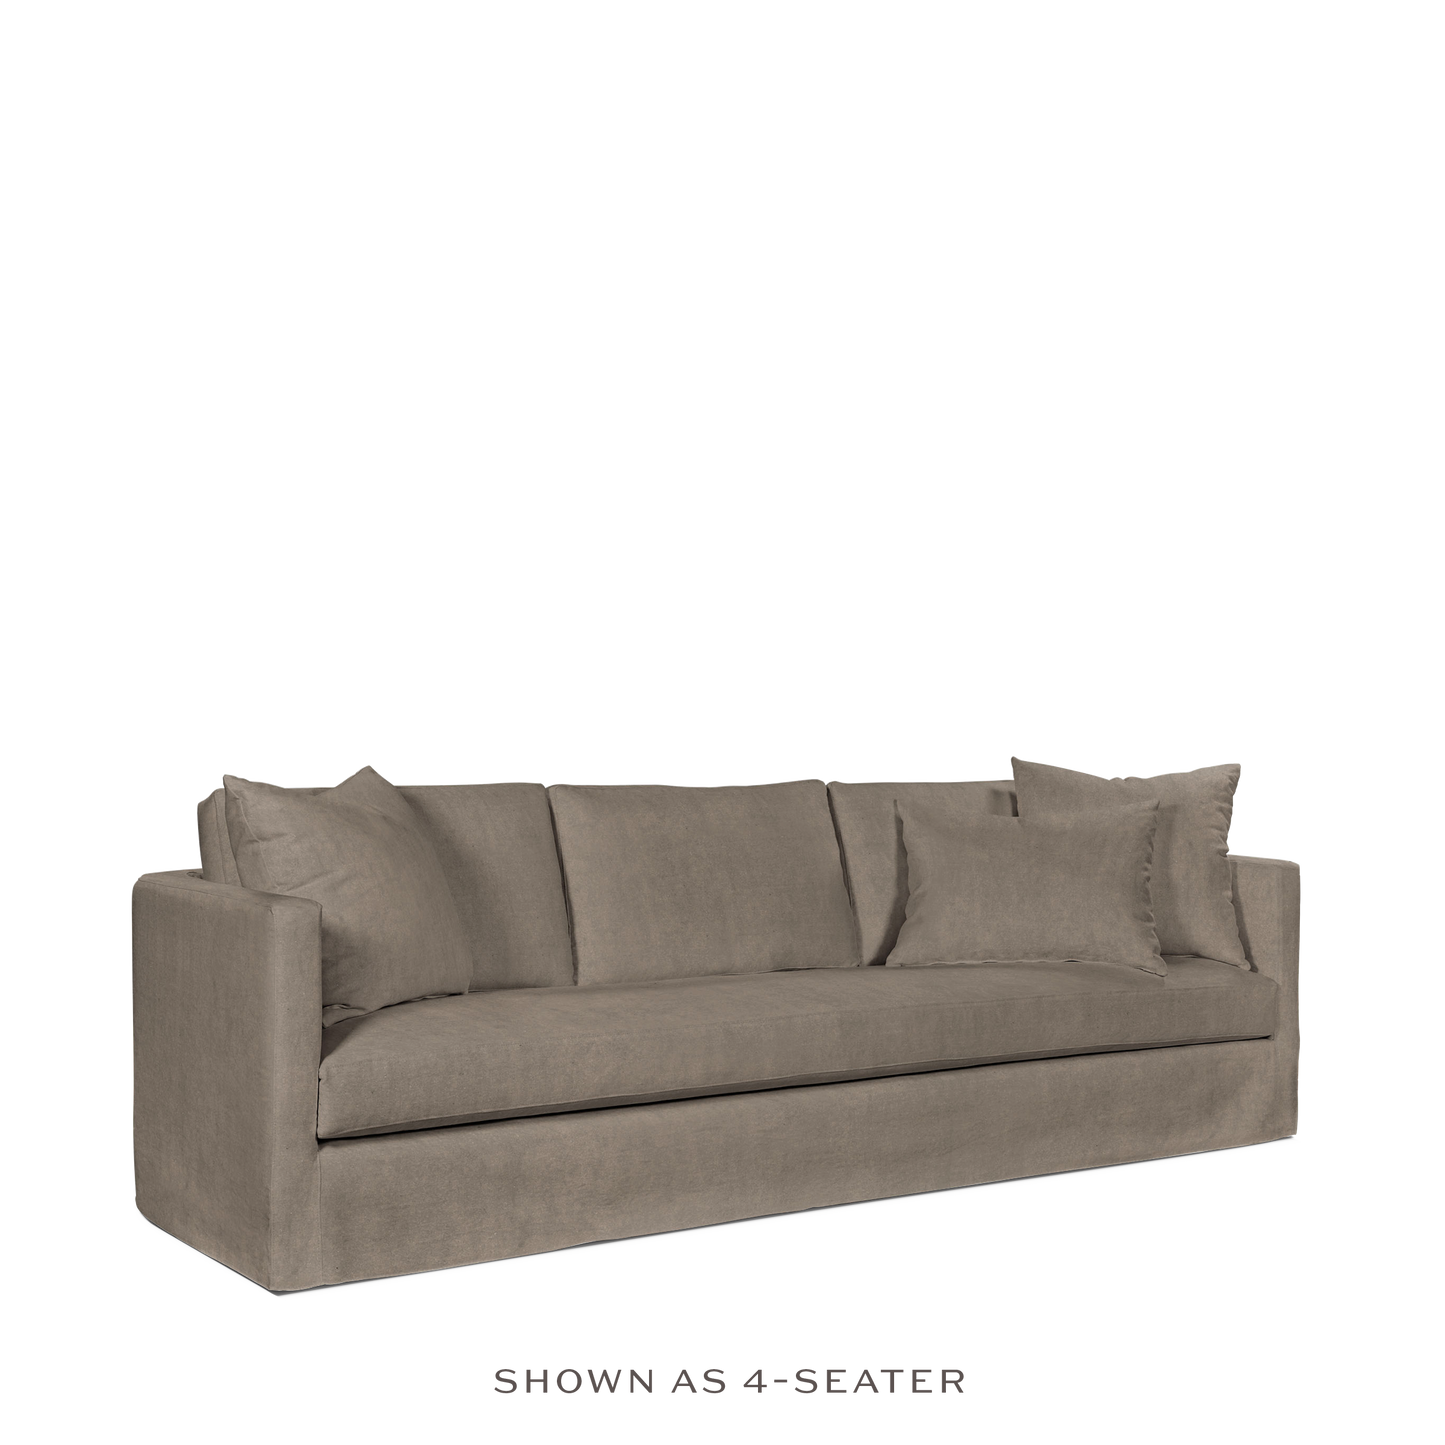 NIDO 2,5-seater sofa with suede grey textile